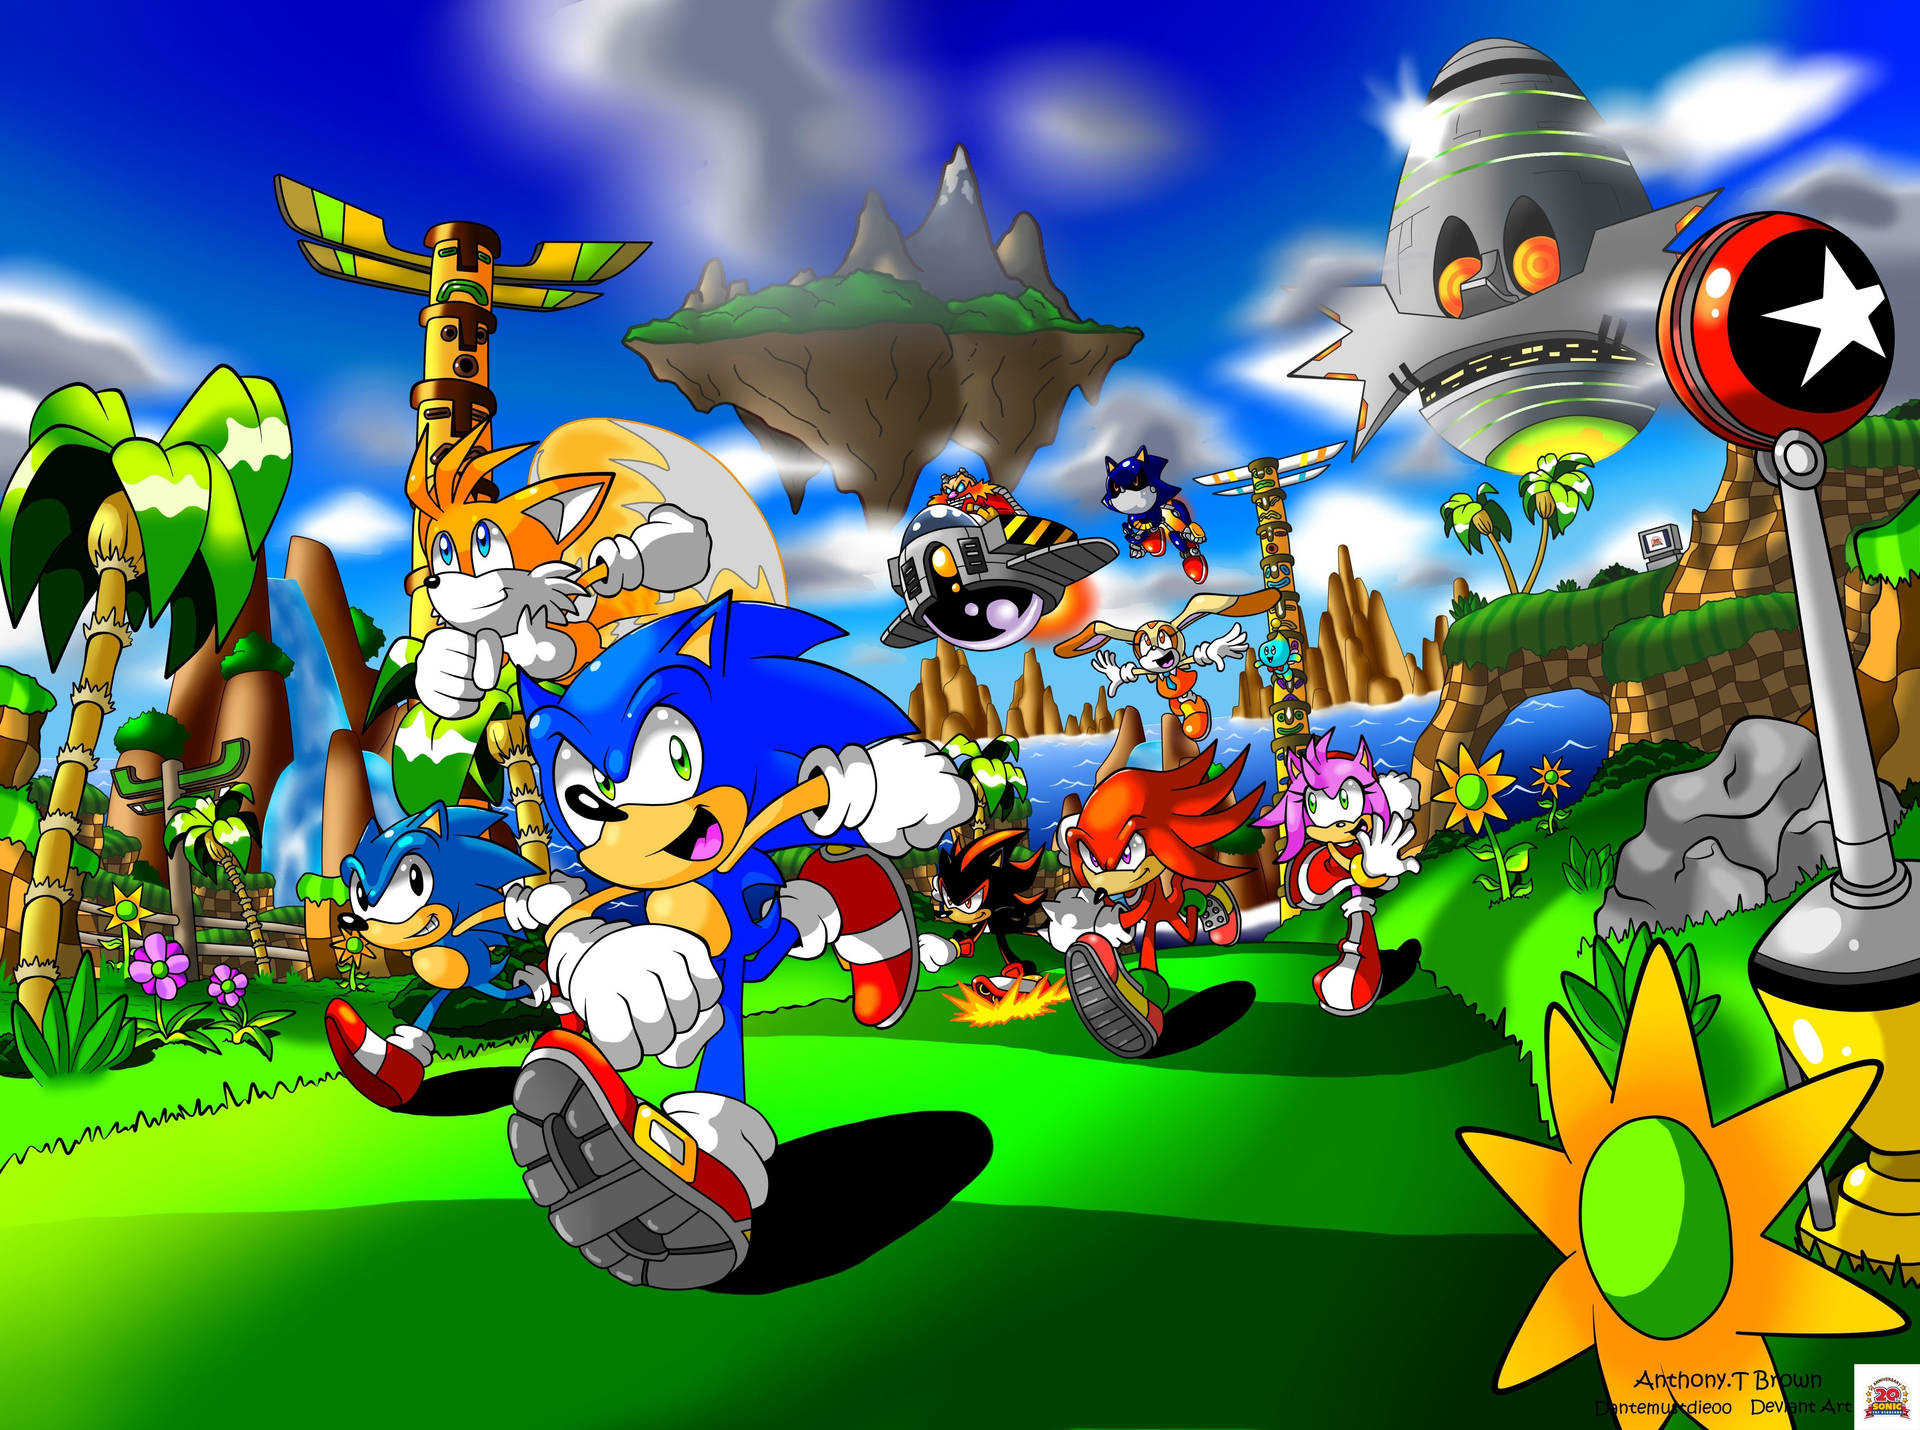 Download Sonic In Tropical Jungle Wallpaper